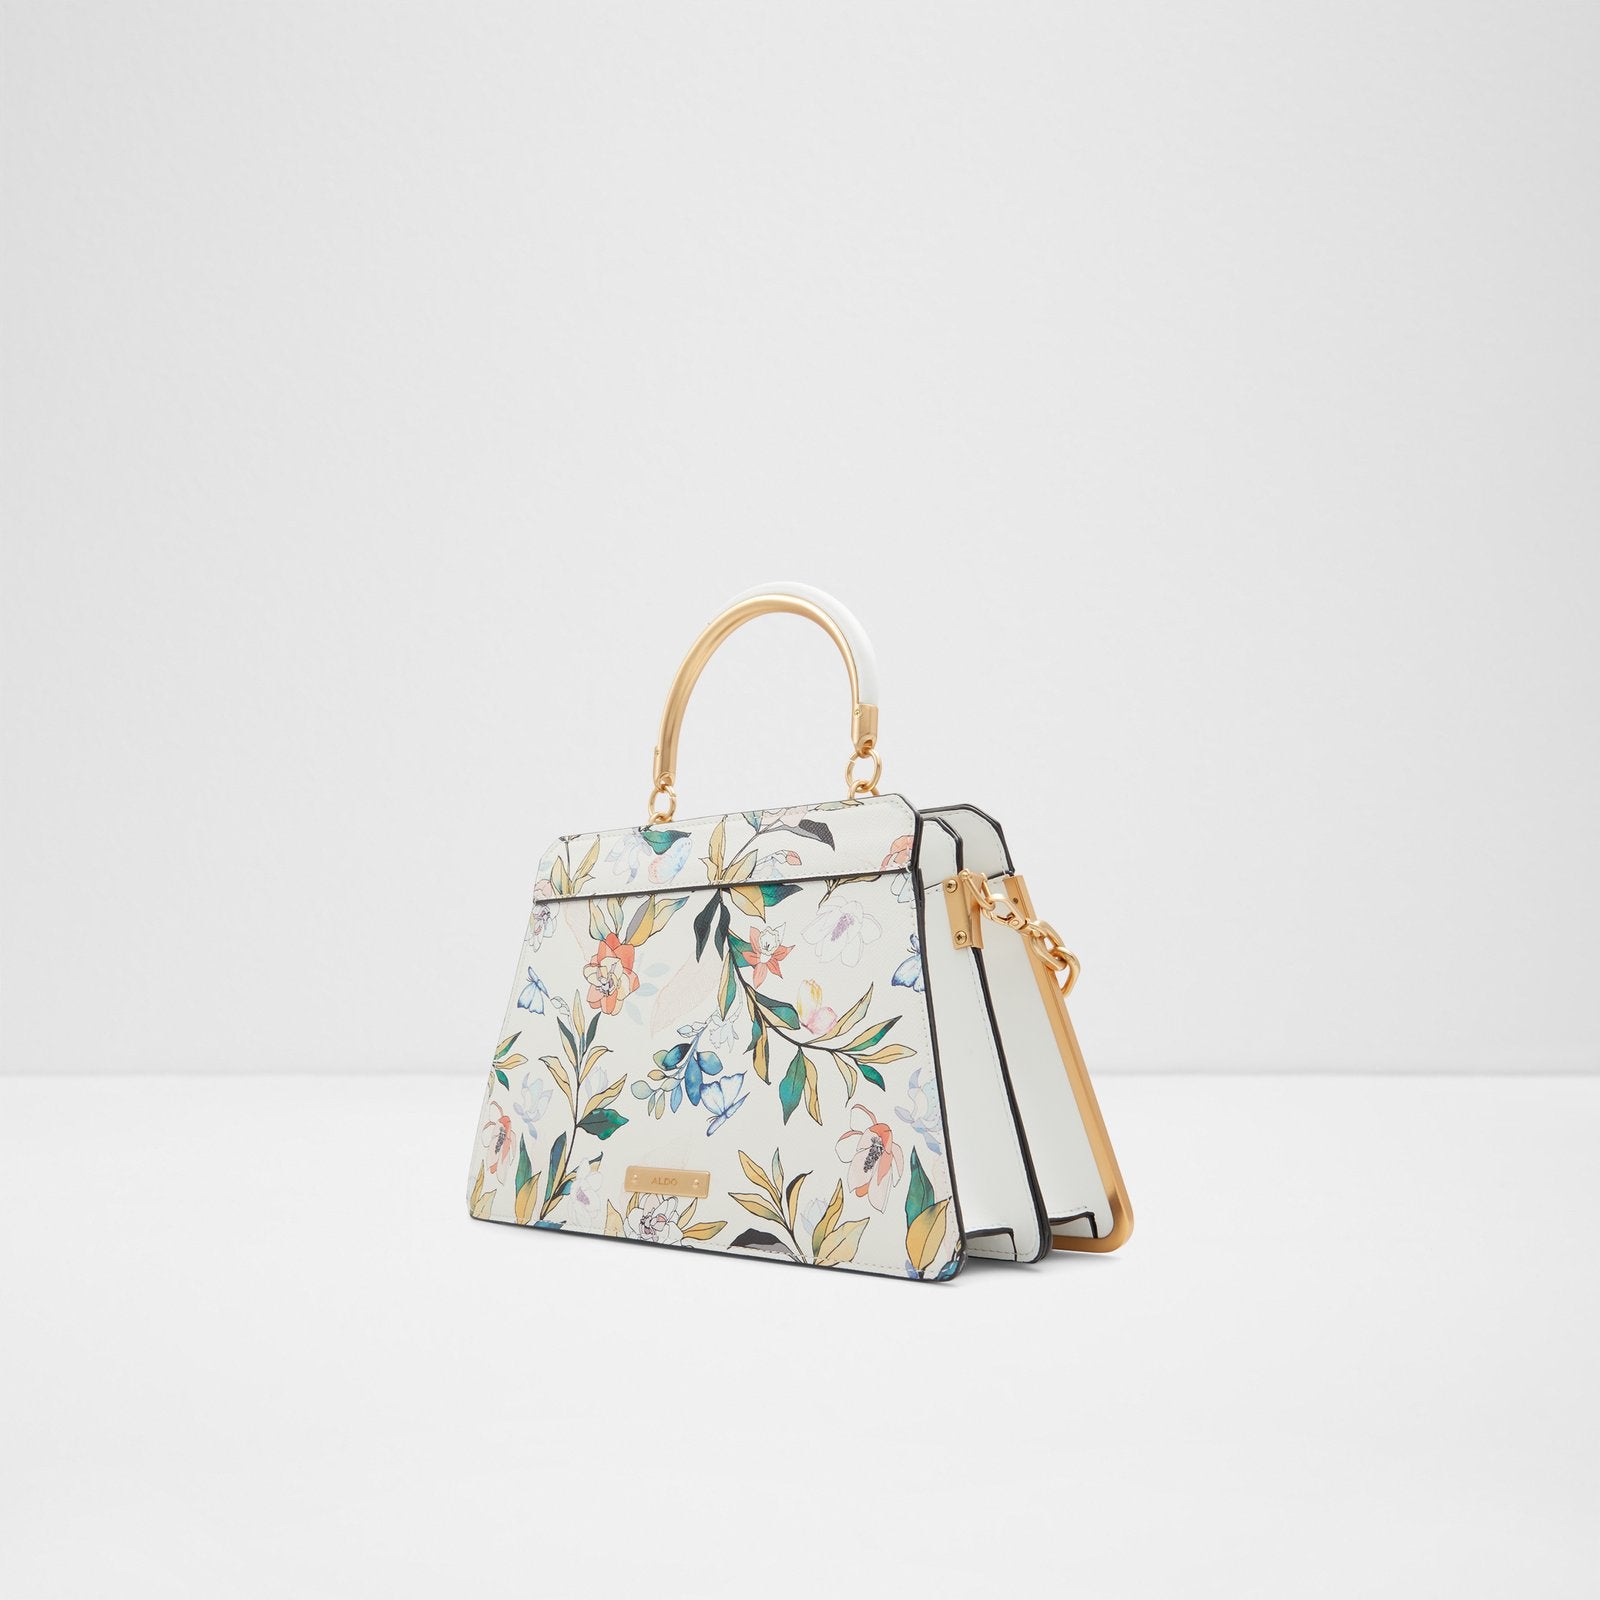 New ALDO Bags Collection